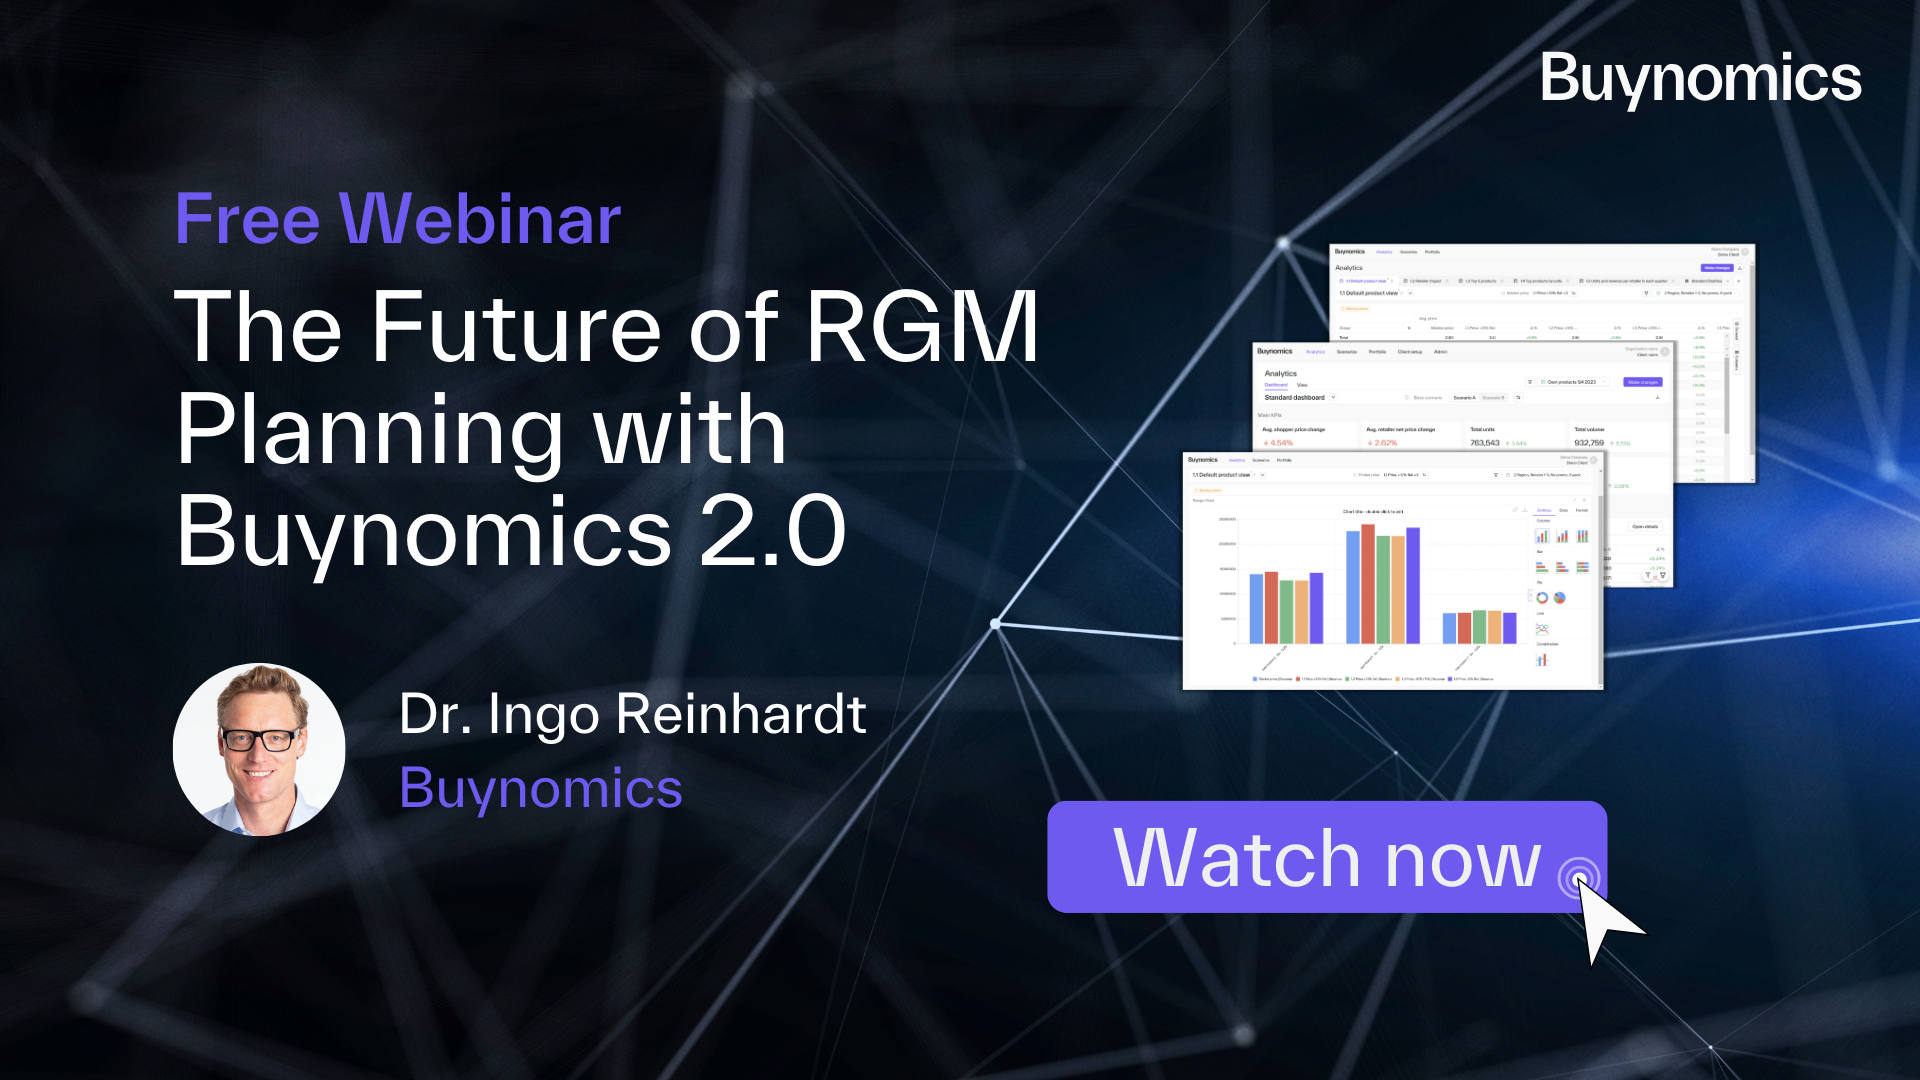 The Future of RGM with Buynomics 2.0